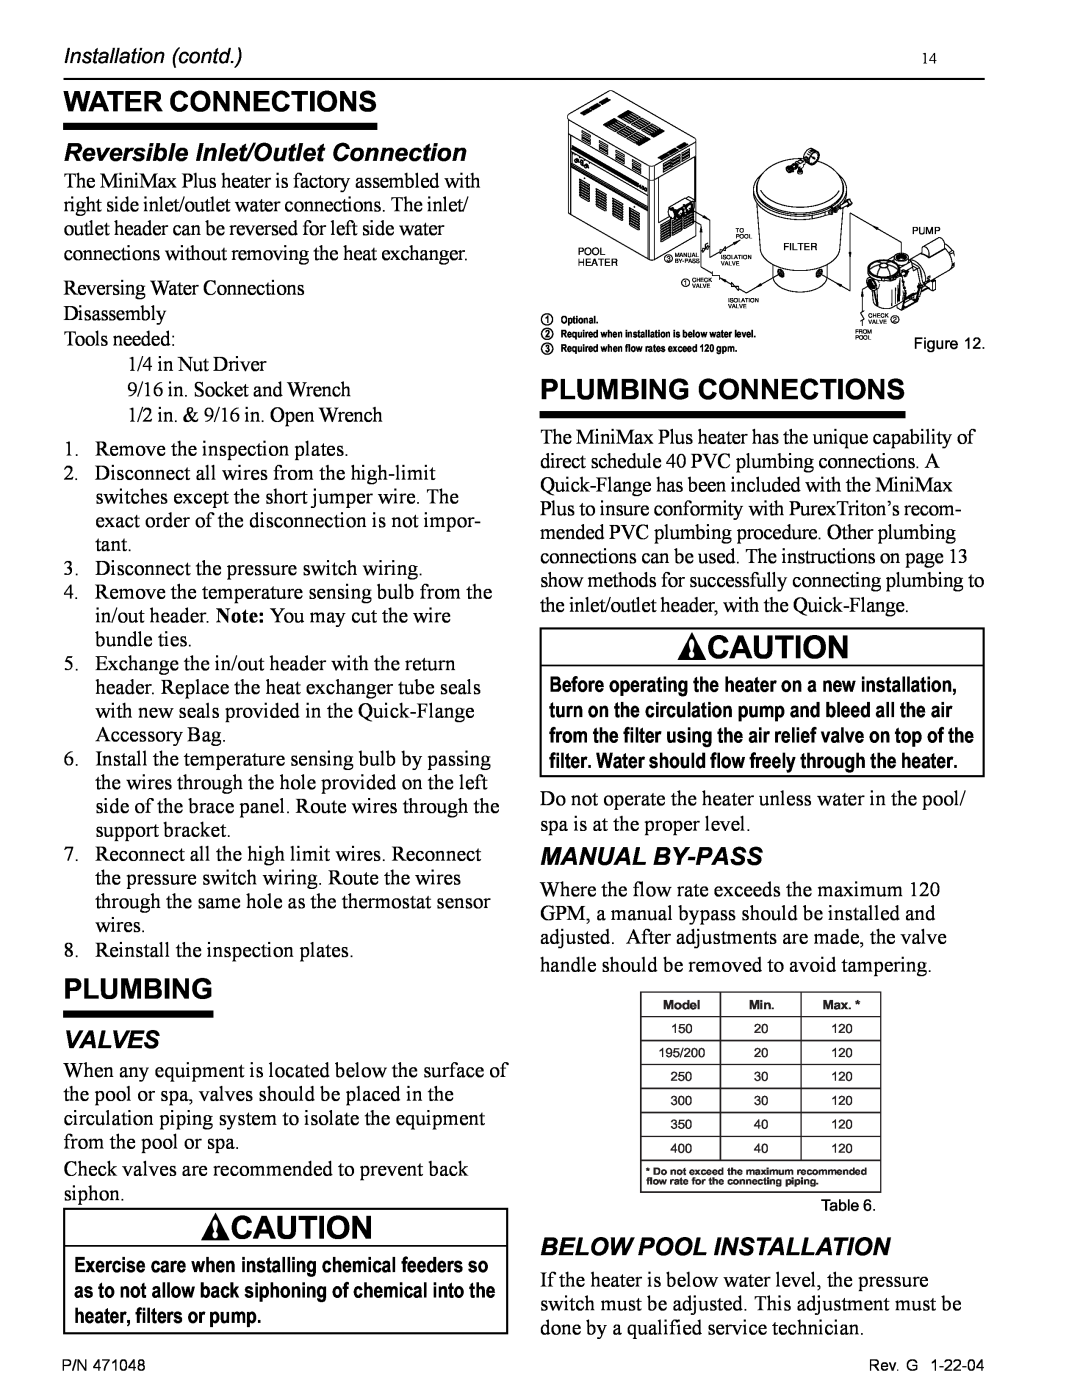 Pentair PowerMax Water Connections, Plumbing Connections, Reversible Inlet/Outlet Connection, Valves, Manual By-Pass 